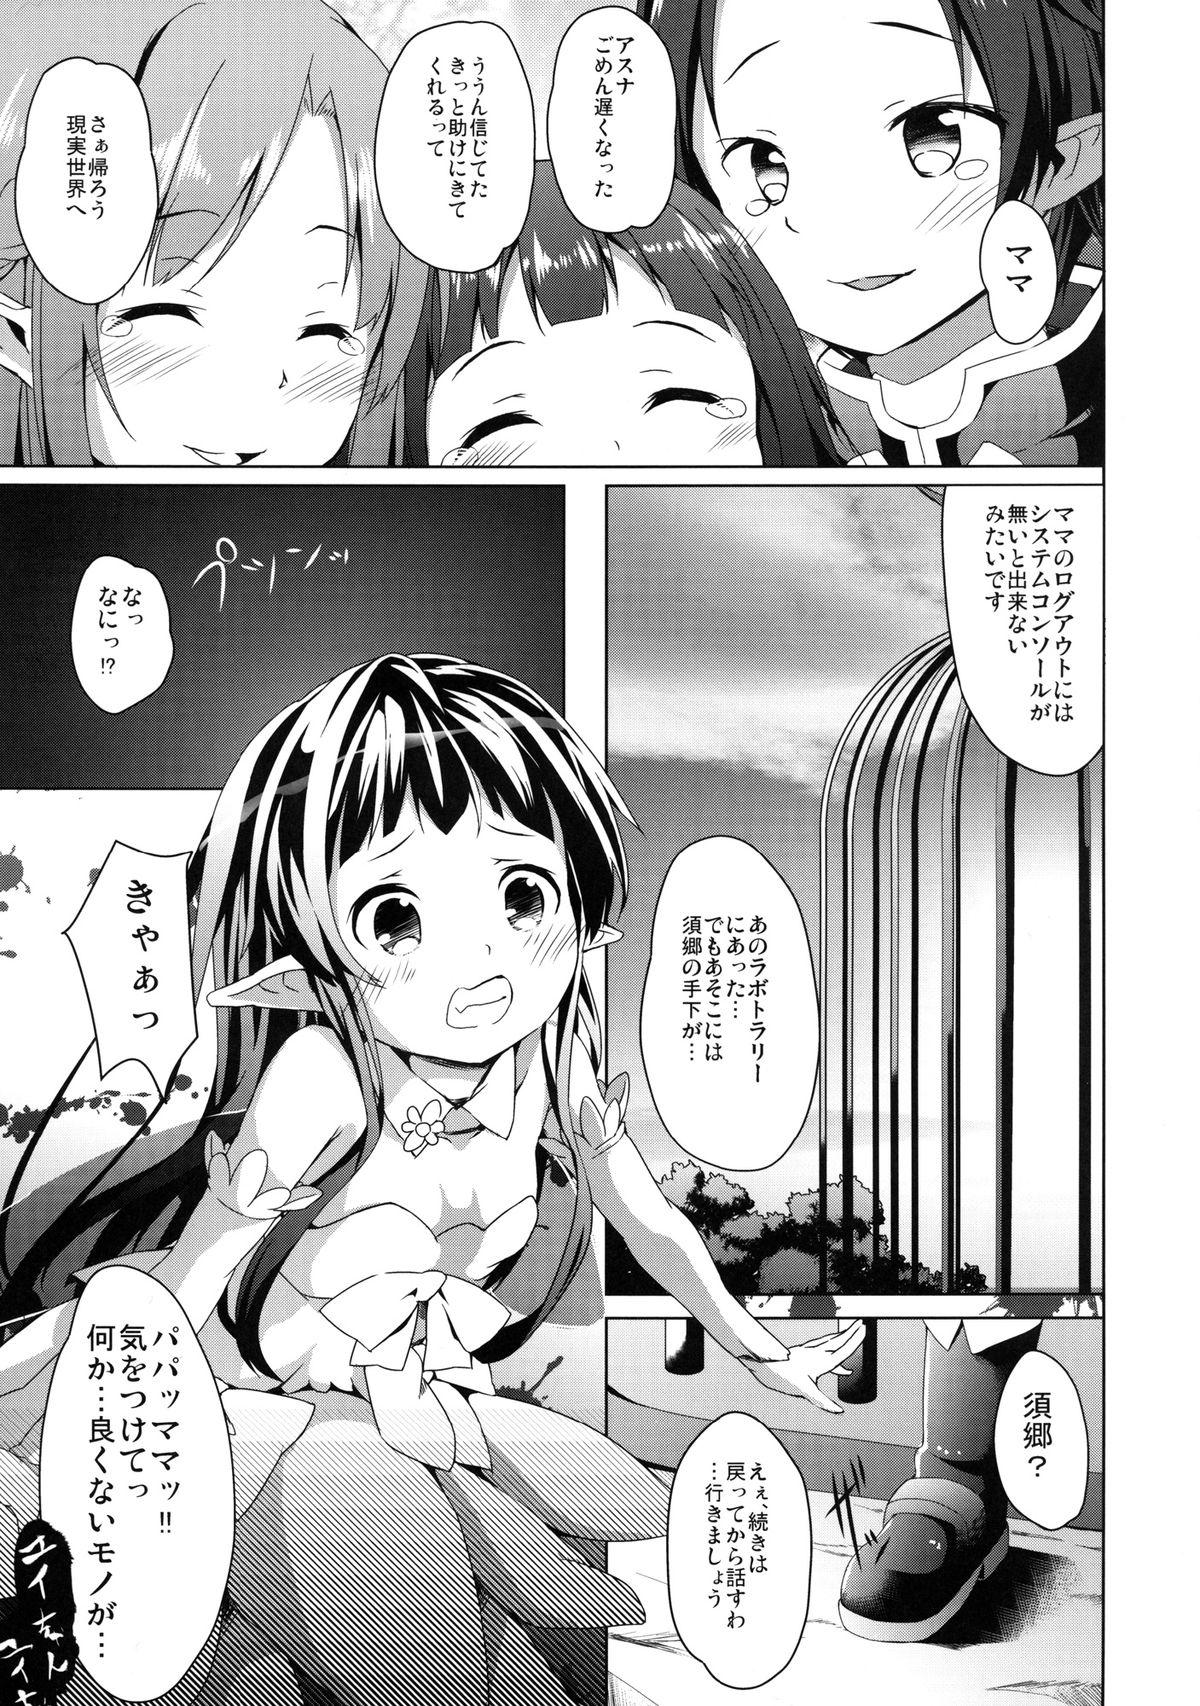 Soloboy Yui-chan BOKOO! - Sword art online Amature - Page 3